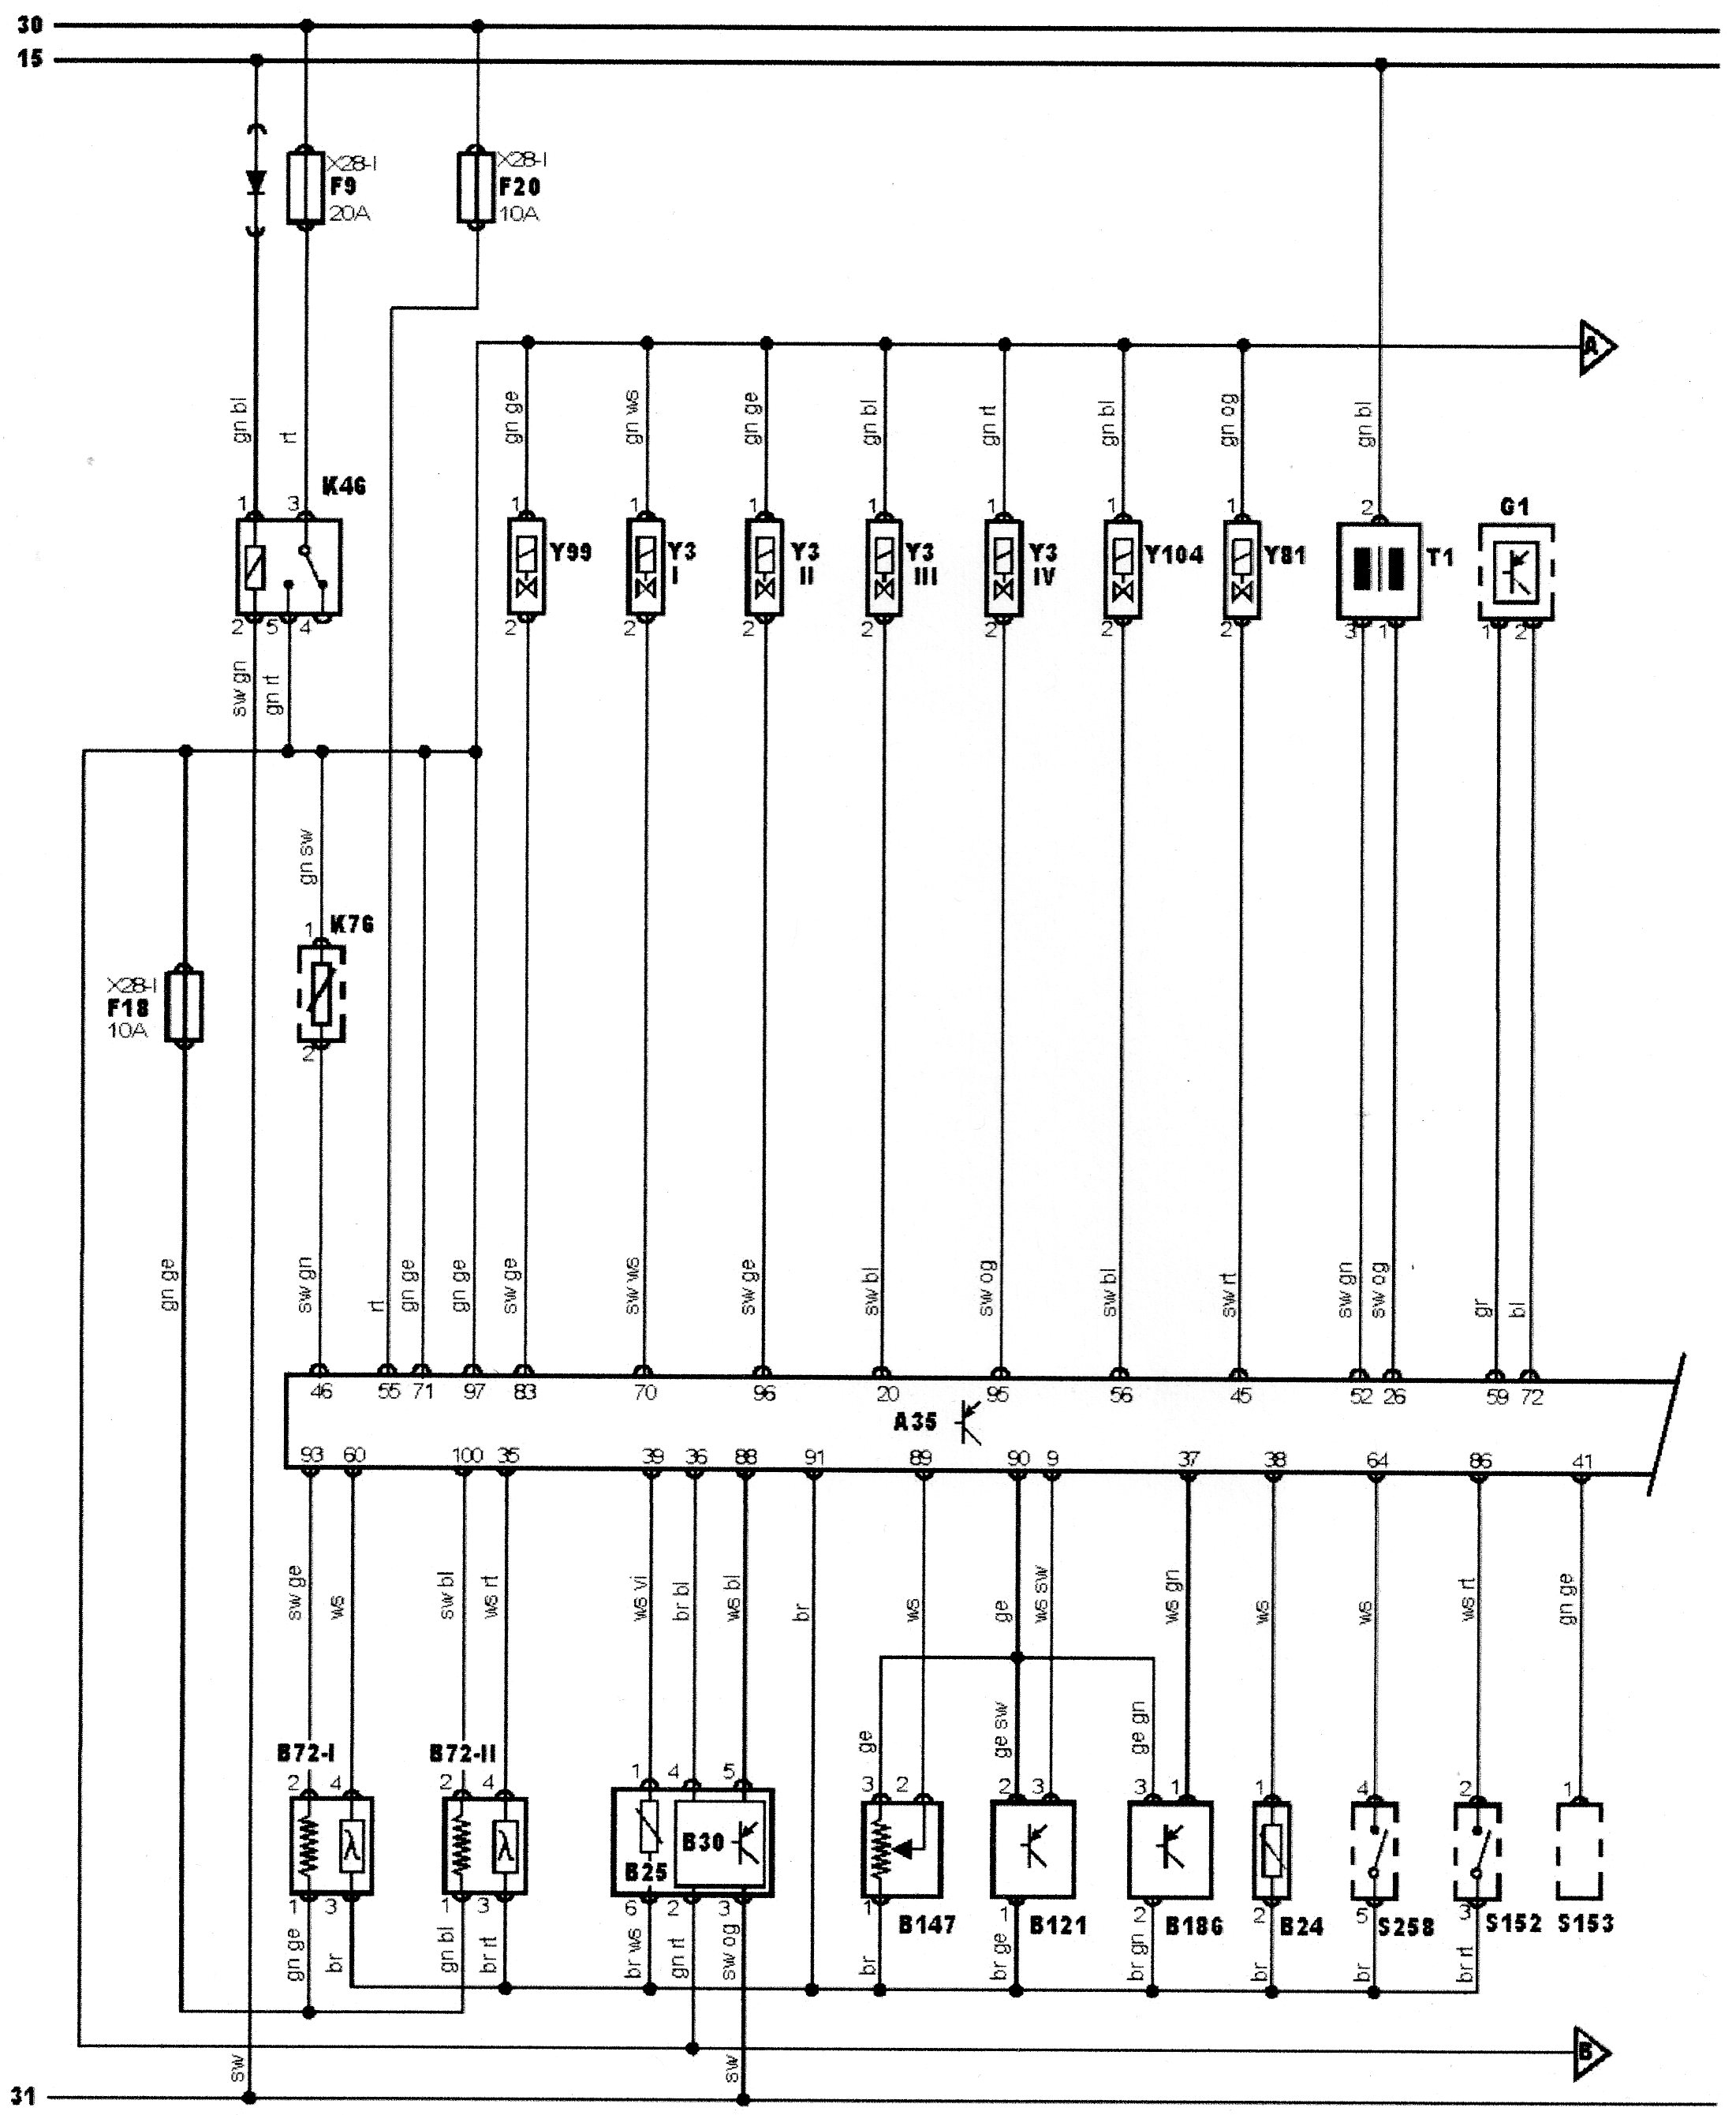 Anyone Kind Enough To Post A Ignition Wiring Diagram - General Ford